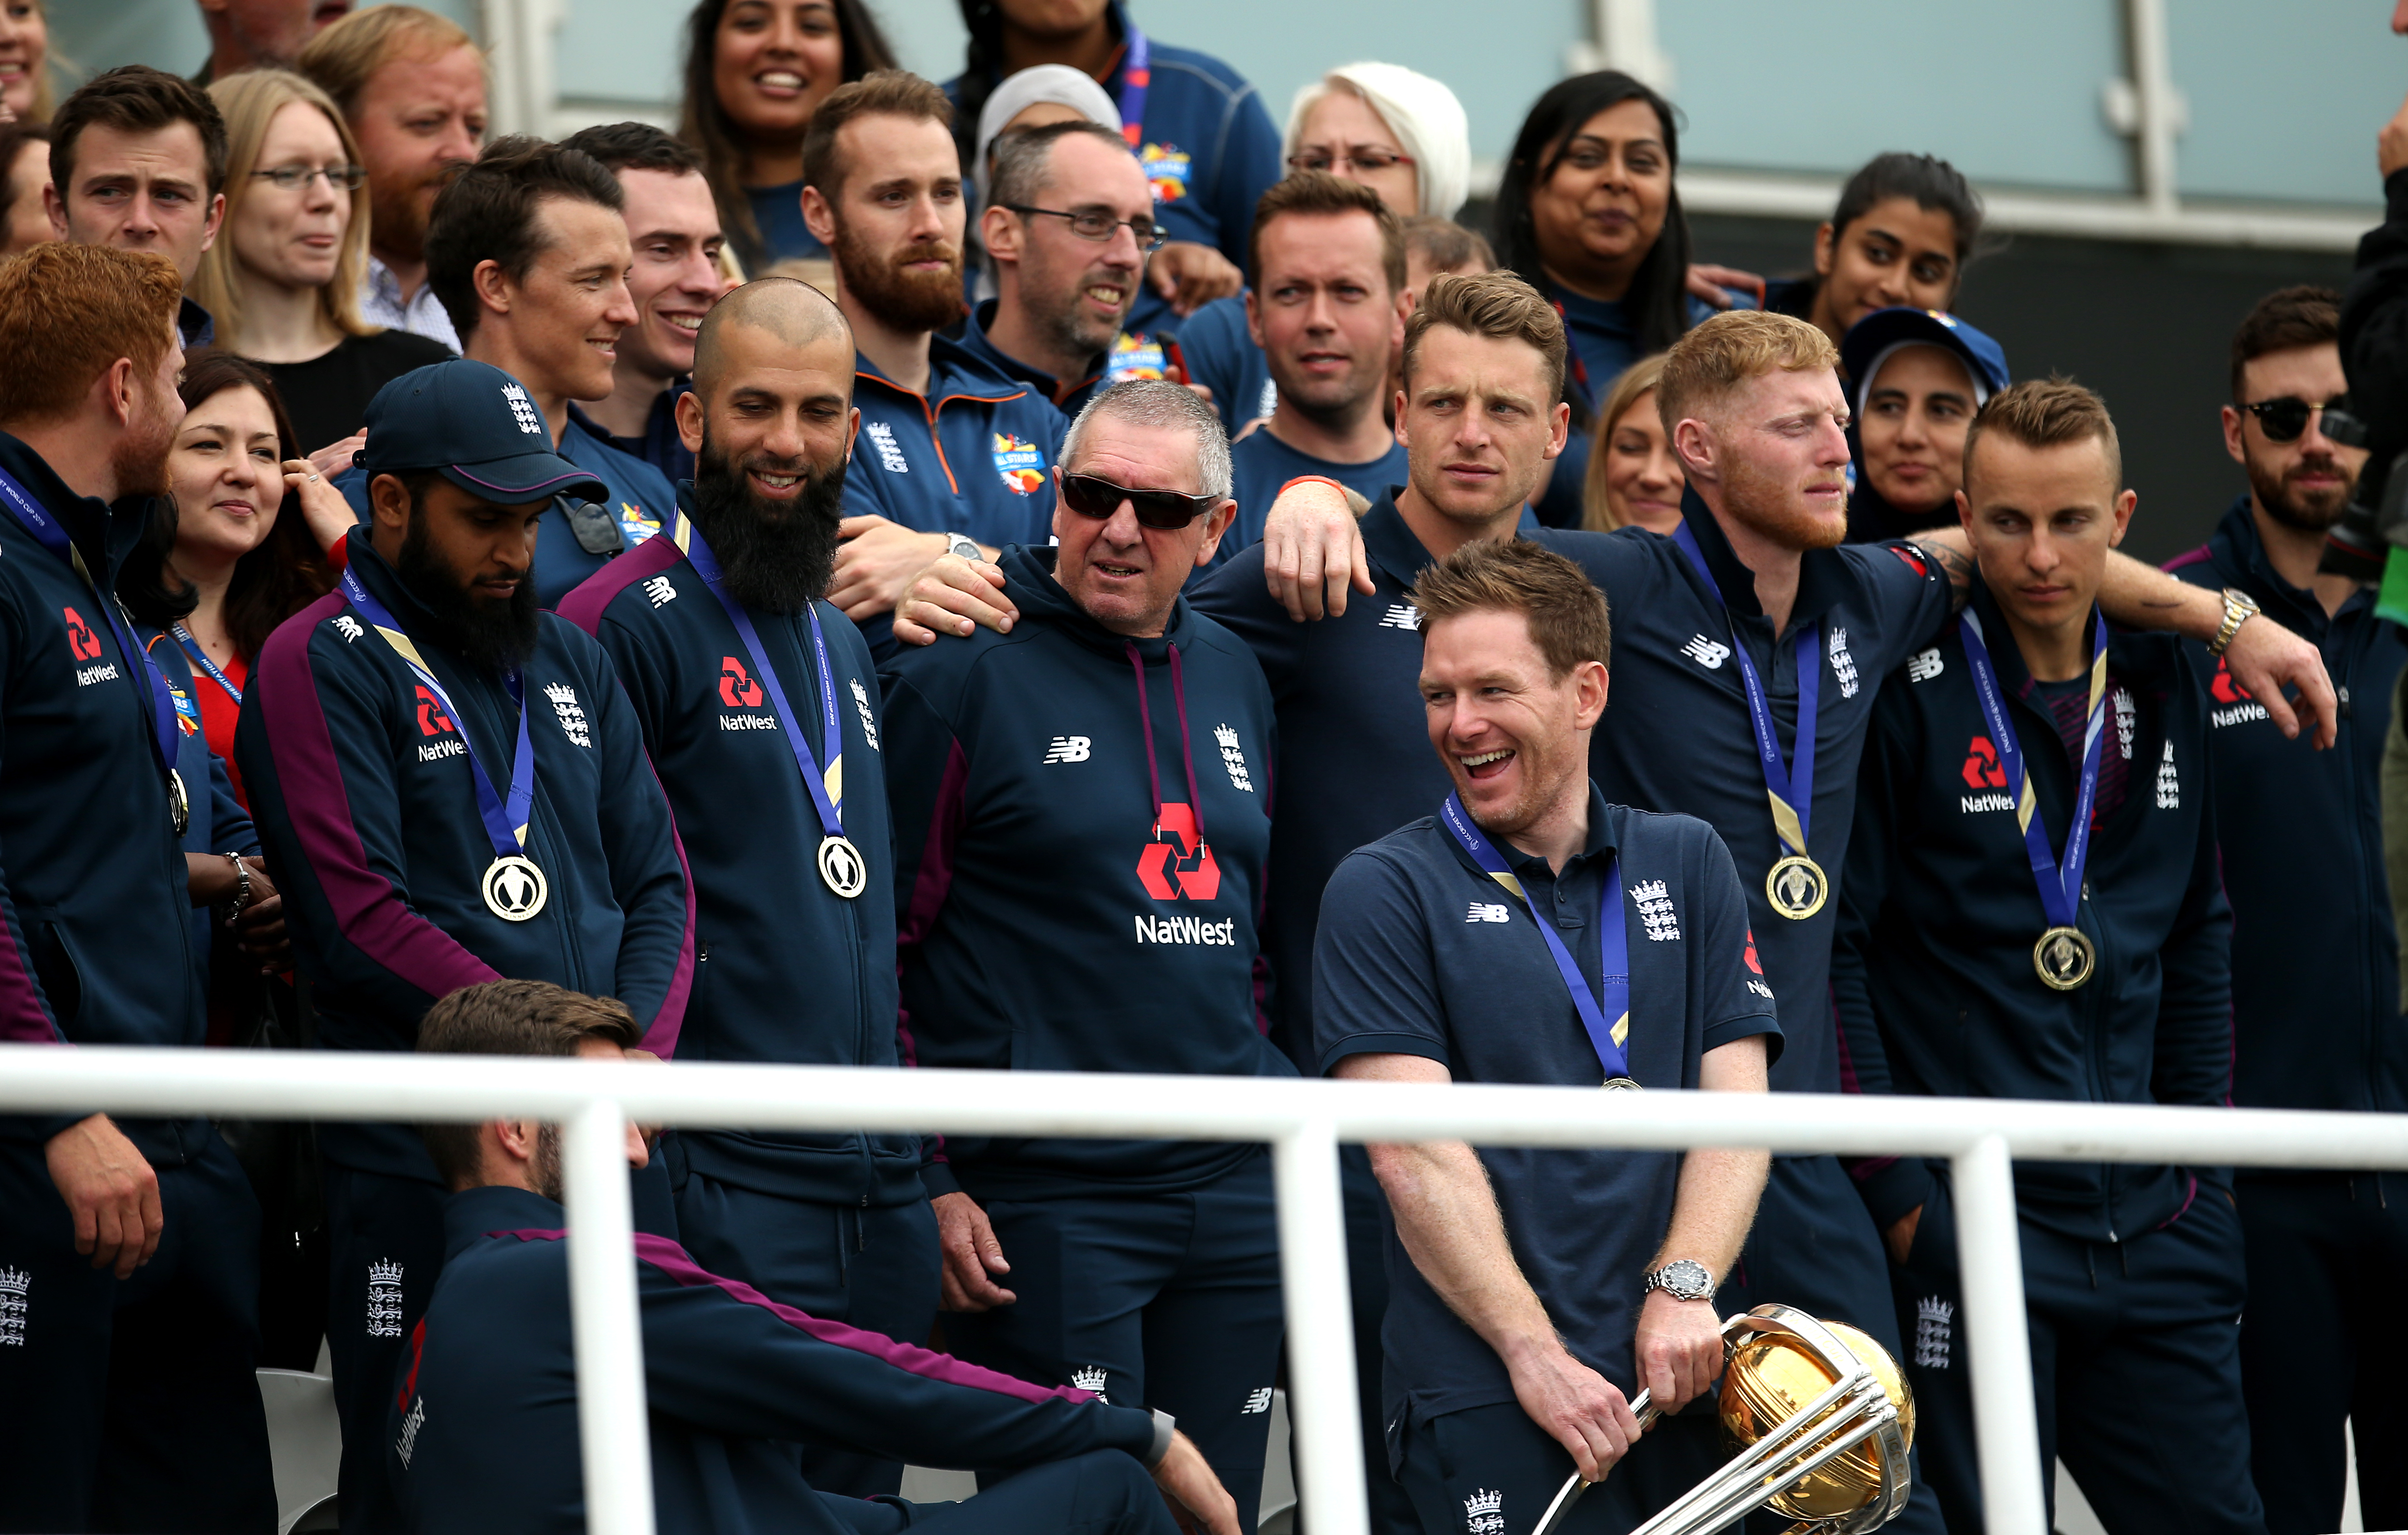 Trevor Bayliss, centre, was England head coach when they won the 2019 World Cup (Steven Paston/PA)